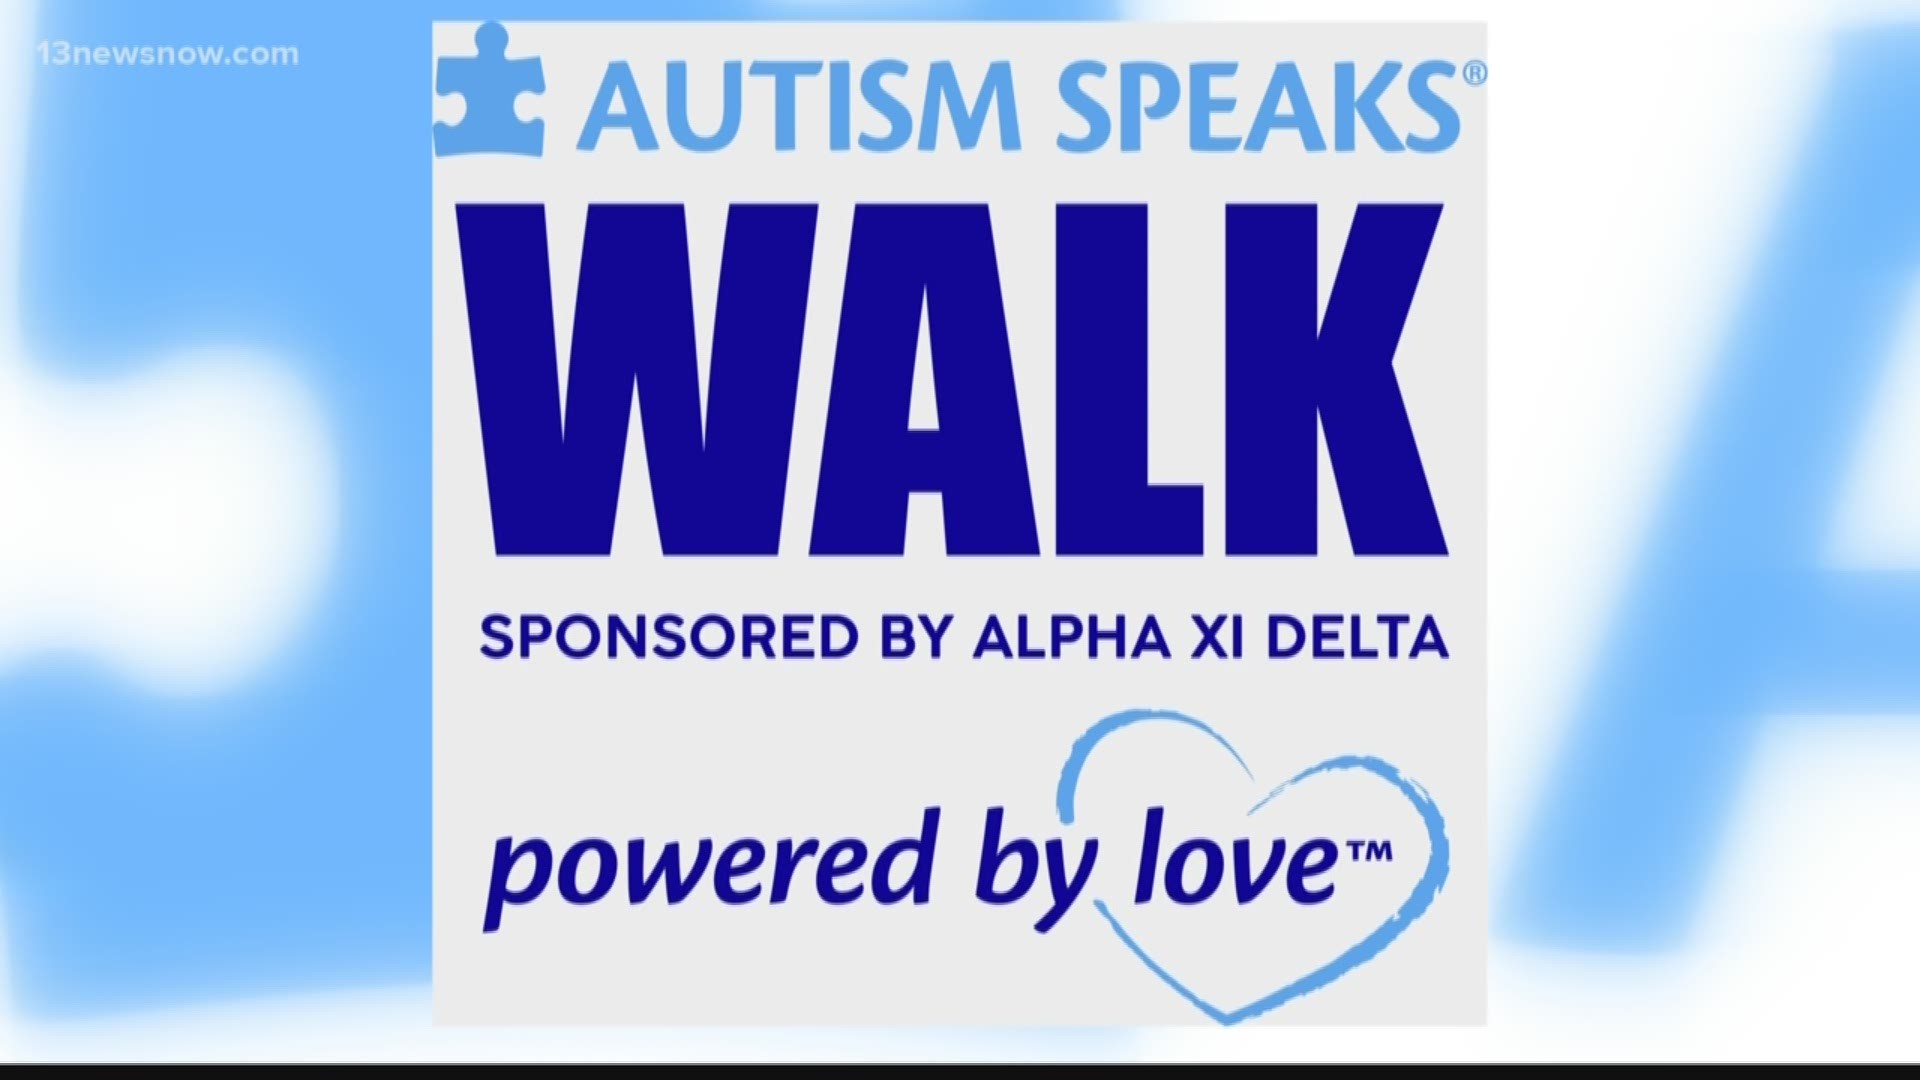 The National Capital Area chapter of Autism Speaks will host it first walk in Virginia Beach on Nov. 4.